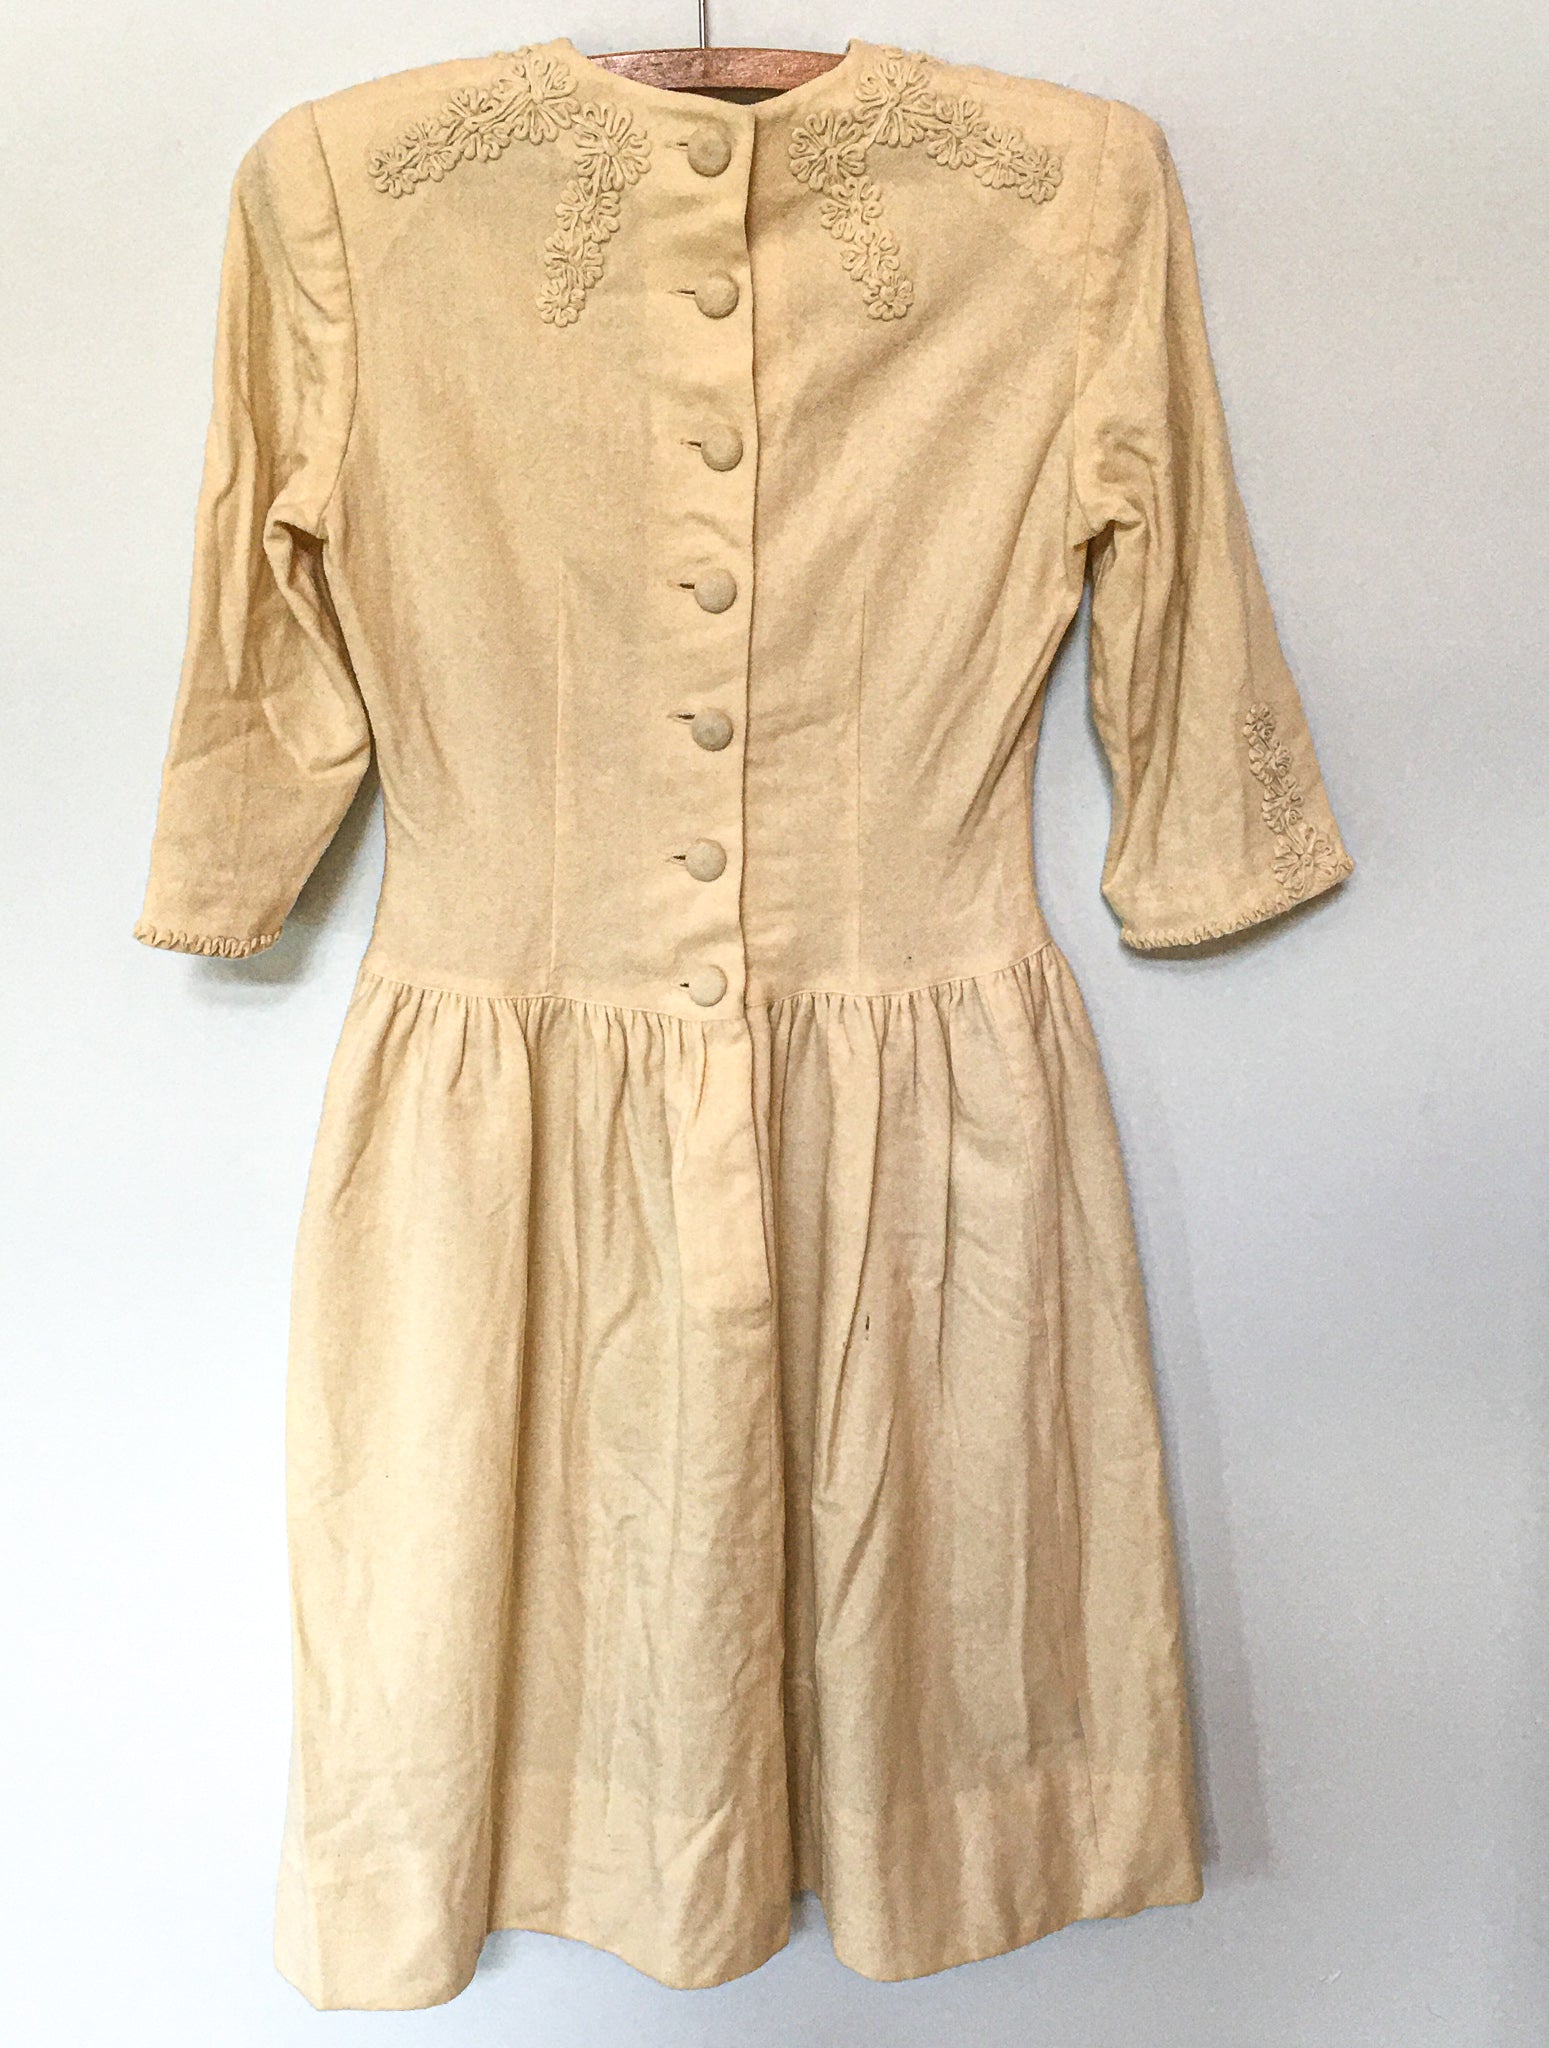 1940’s Lord & Taylor “Young New Yorkers” Dress, Silk Gloves, and Leather Dress Shoes